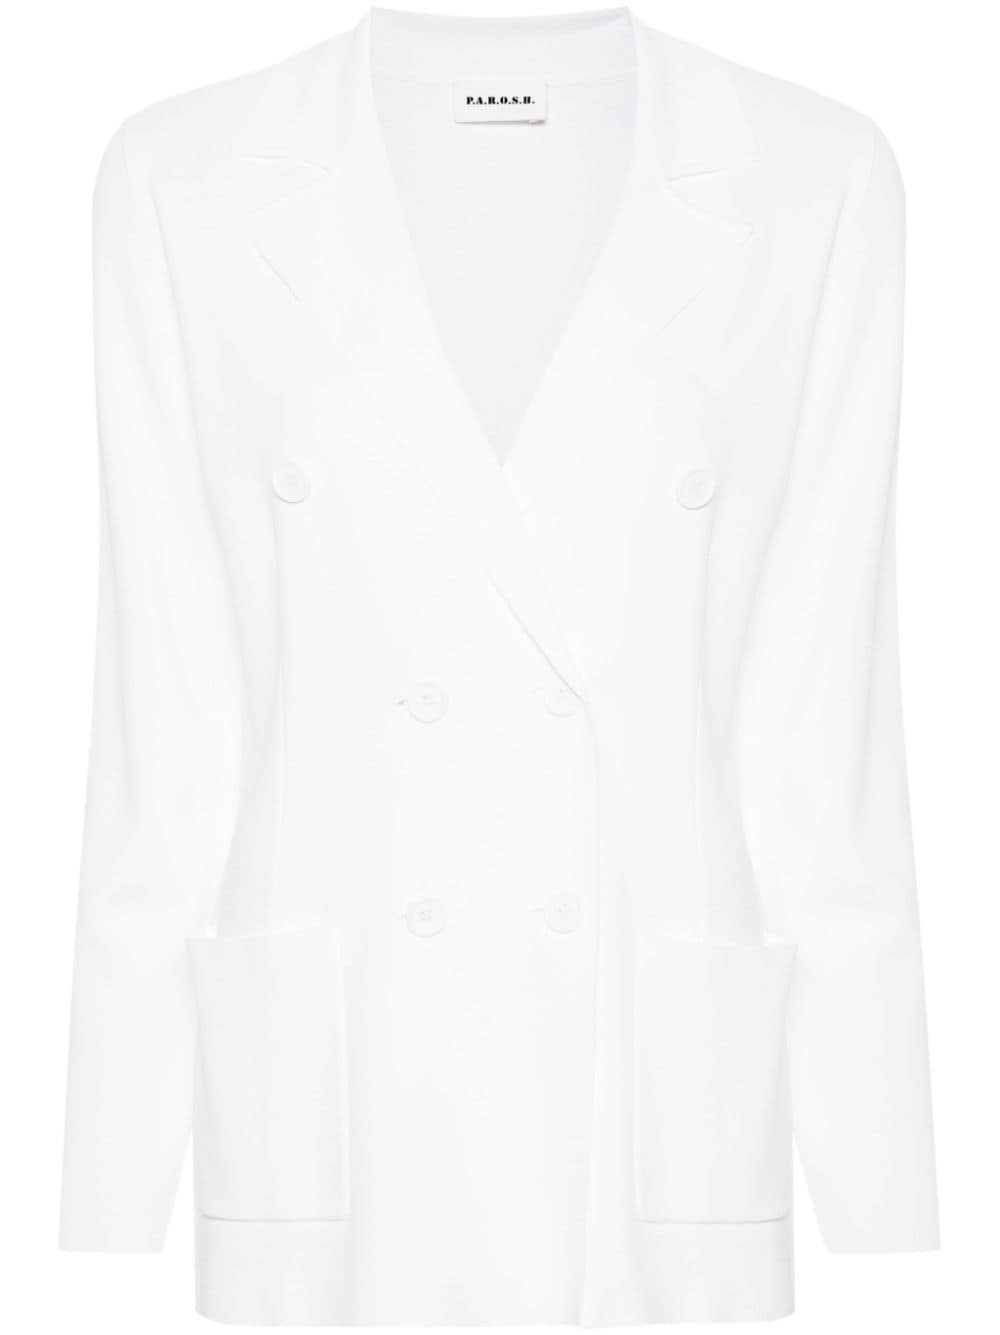 P.A.R.O.S.H. double-breasted knitted blazer - White von P.A.R.O.S.H.